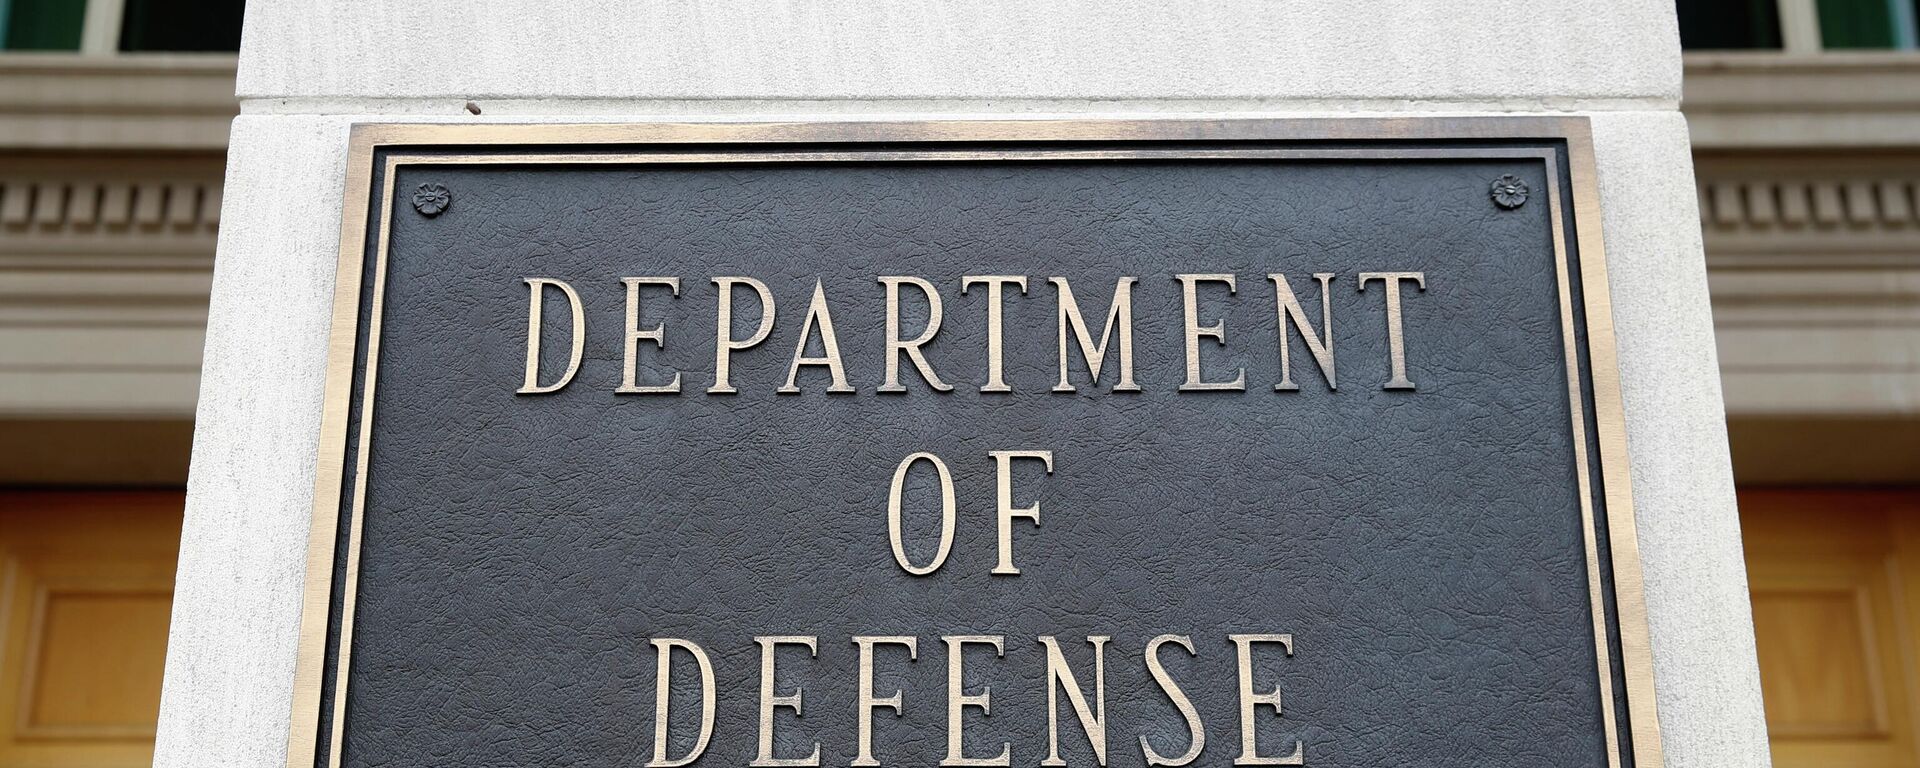 This April 19, 2019 file photo shows a sign for the Department of Defense at the Pentagon in Washington.  - Sputnik International, 1920, 10.02.2023